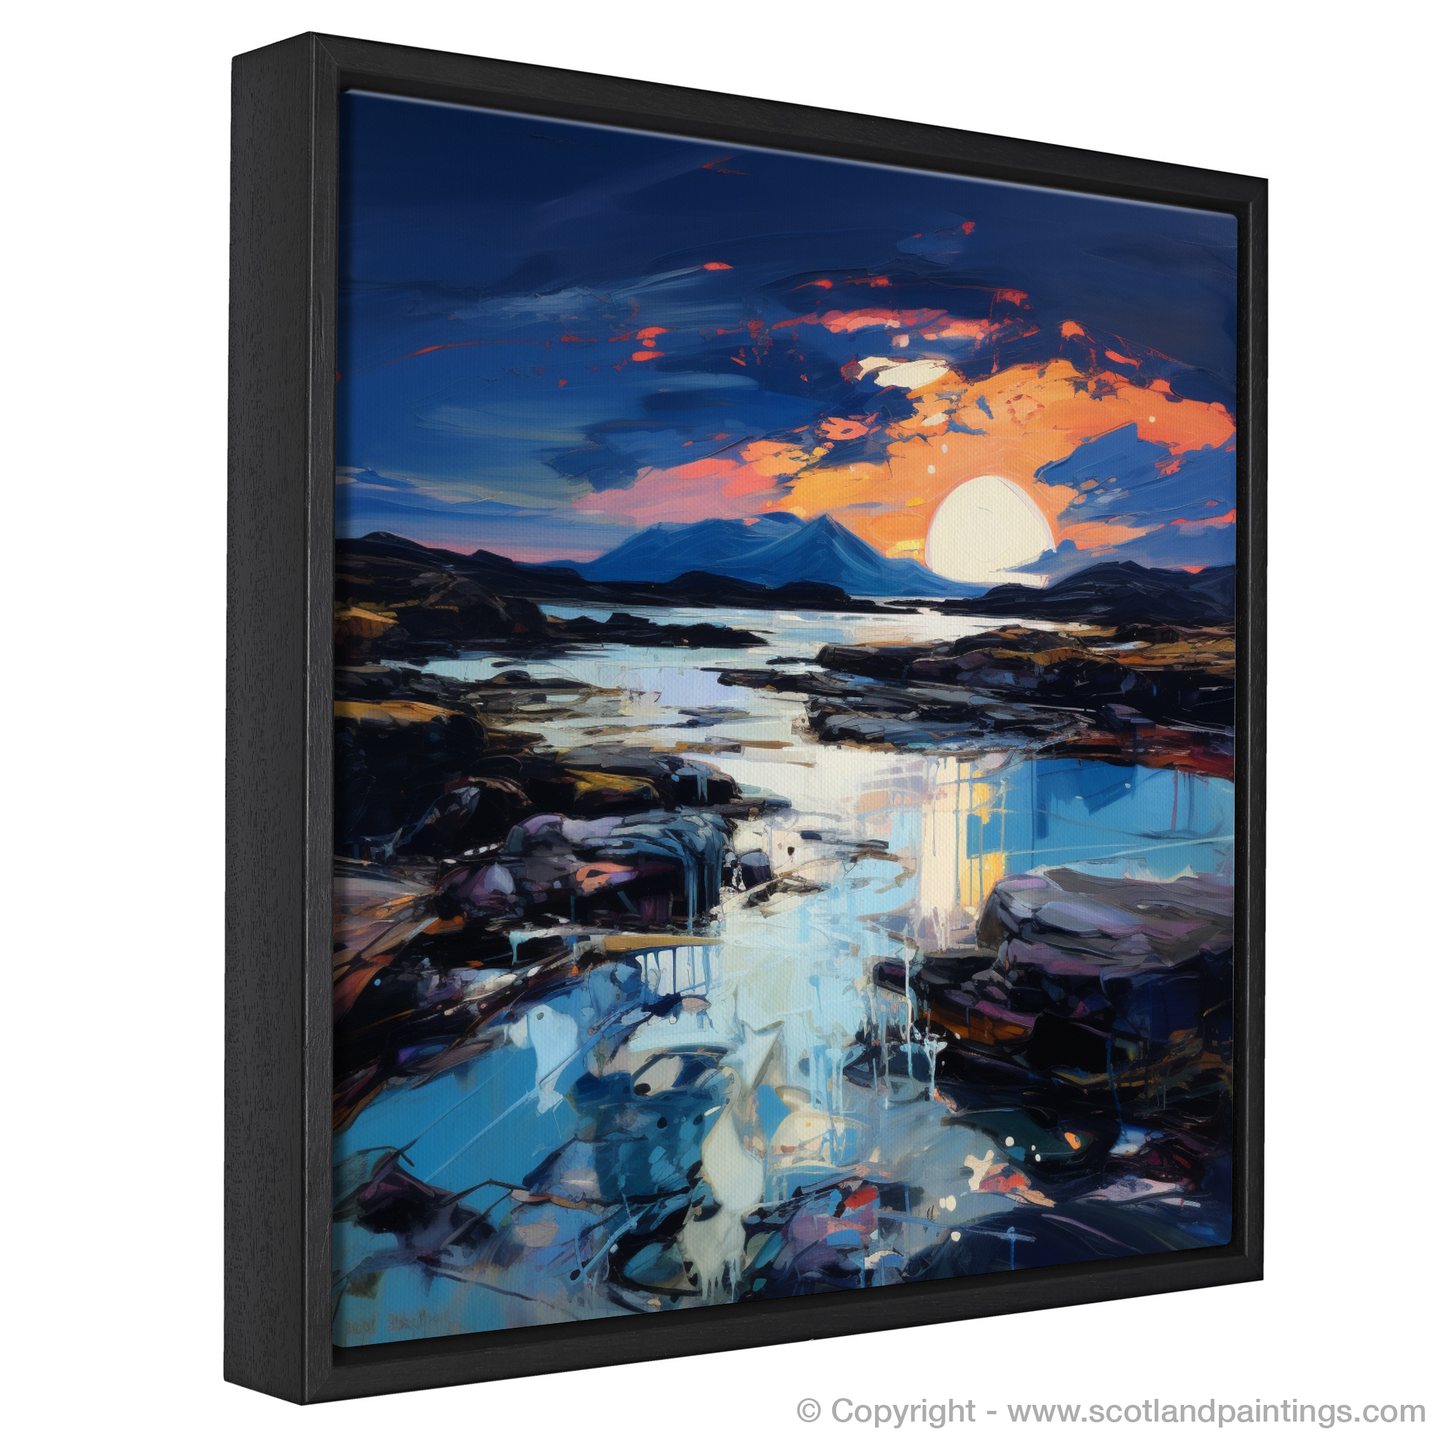 Painting and Art Print of Sound of Iona at dusk. Dusk's Embrace at Sound of Iona.